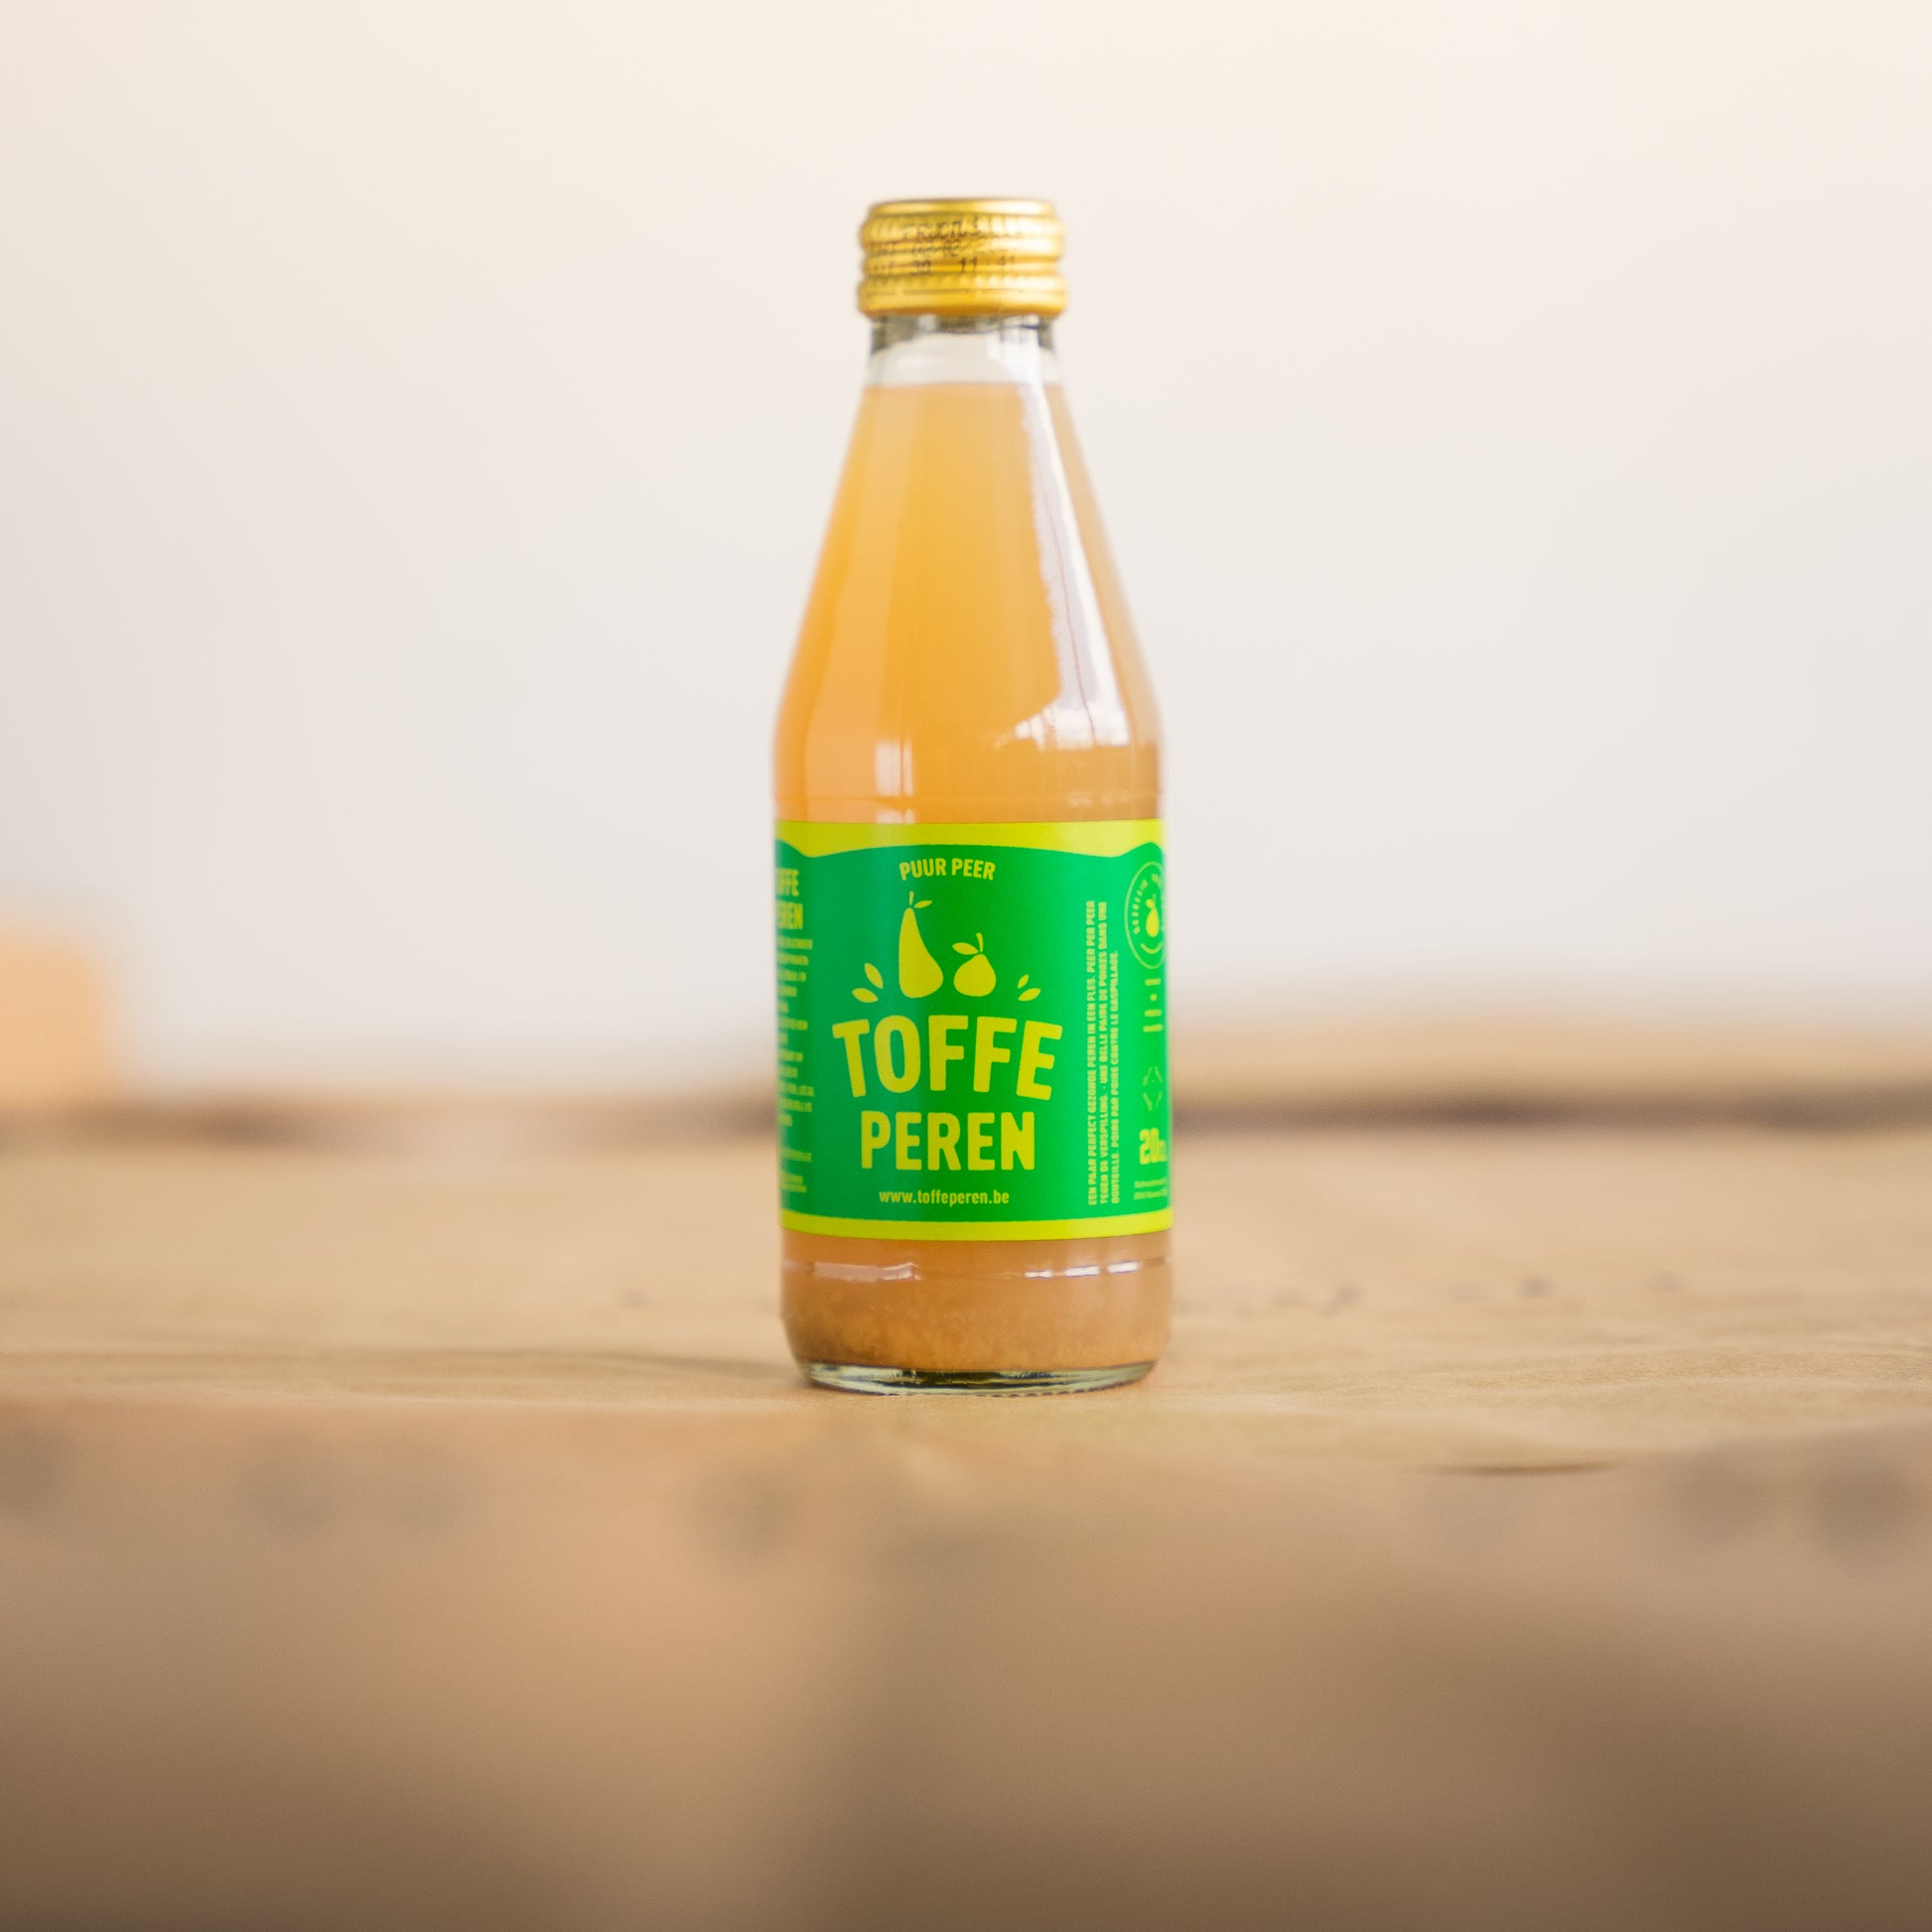 Pear juice bottle from the brand Toffe Peren.